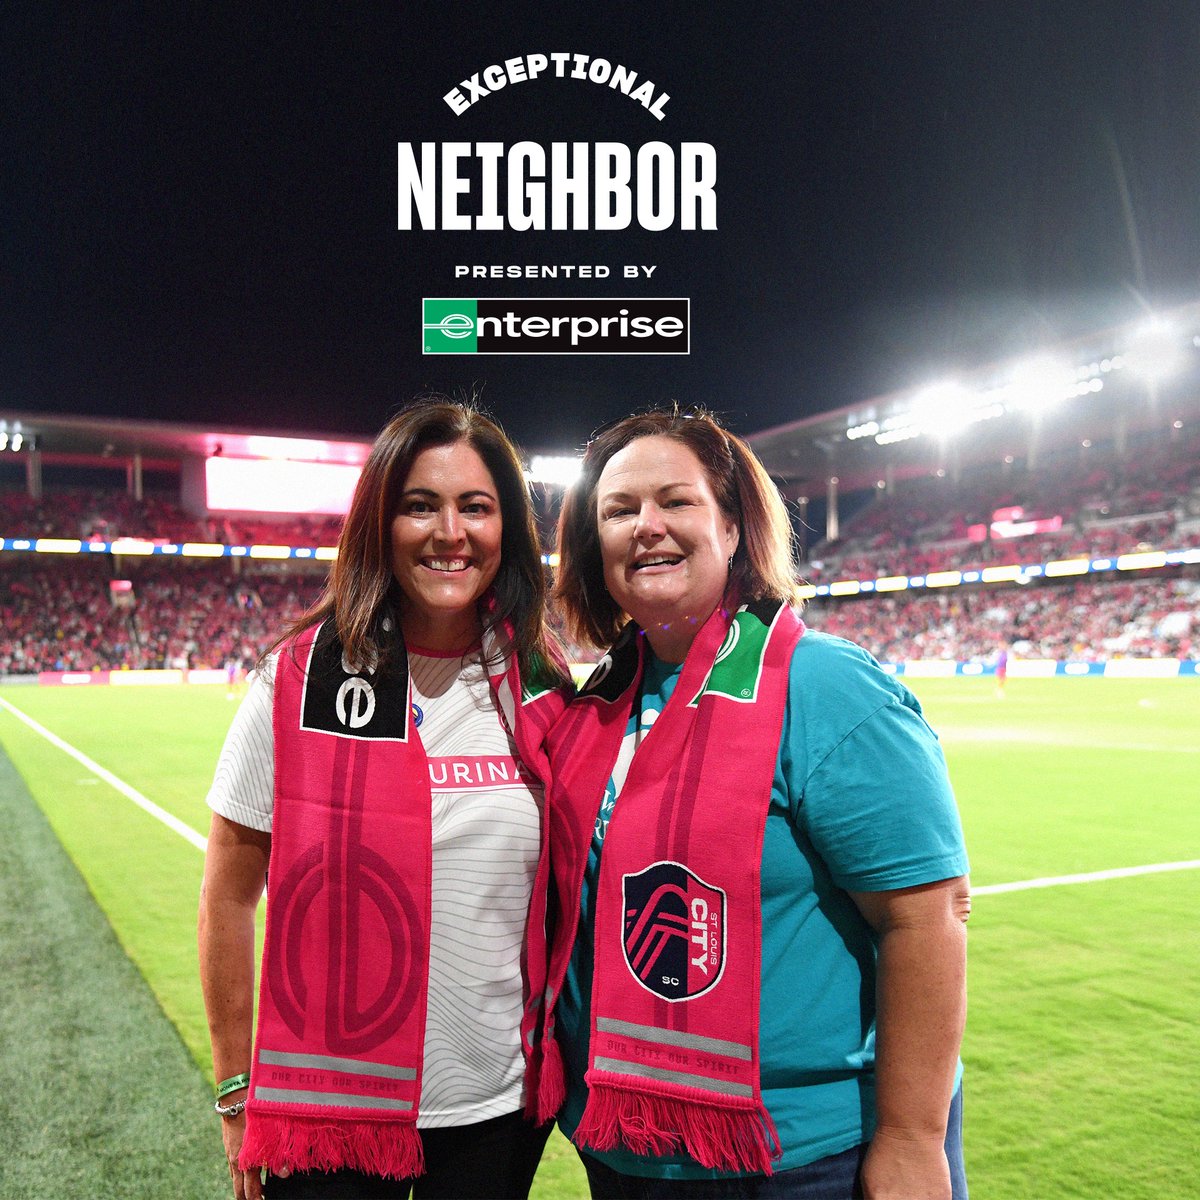 Thanks for being 𝐄𝐱𝐜𝐞𝐩𝐭𝐢𝐨𝐧𝐚𝐥 𝐍𝐞𝐢𝐠𝐡𝐛𝐨𝐫𝐬, Jill & Kristen!

We’re proud to recognize @gatewaypets and all the work they do in the Metro East to champion healthy pets and empowered pet owners 🐾 

#AllForCITY x @Enterprise